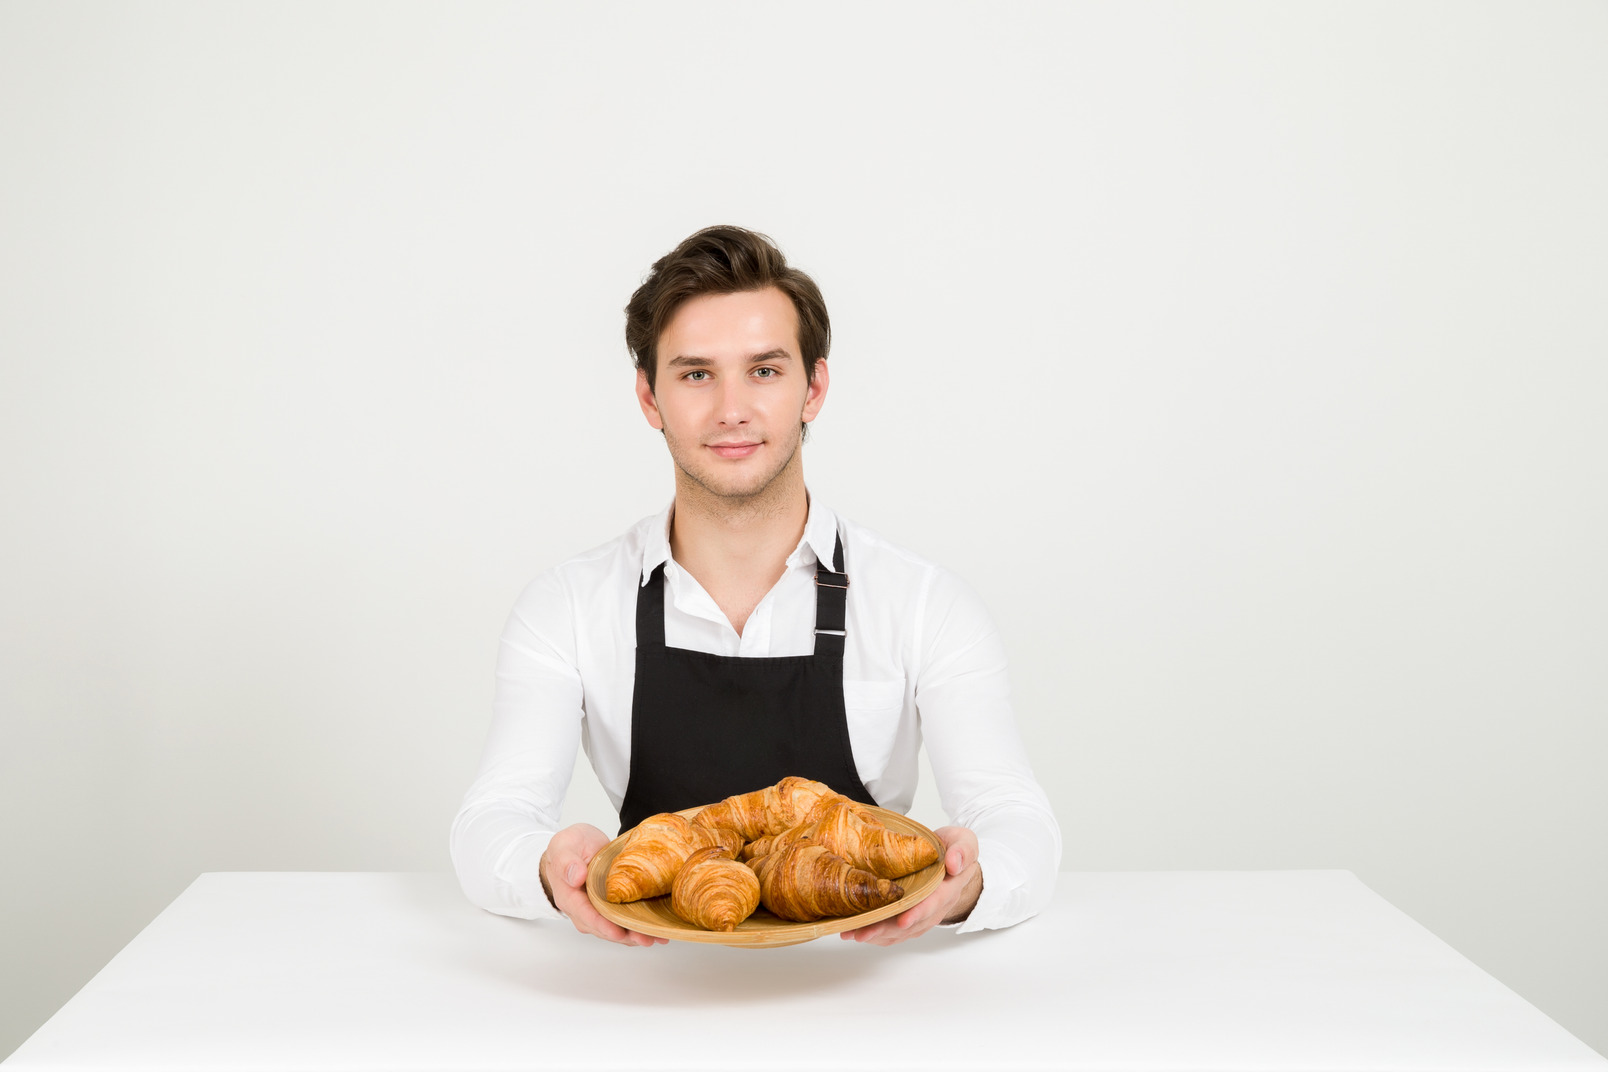 Male chef sitting at table with plate of croissants